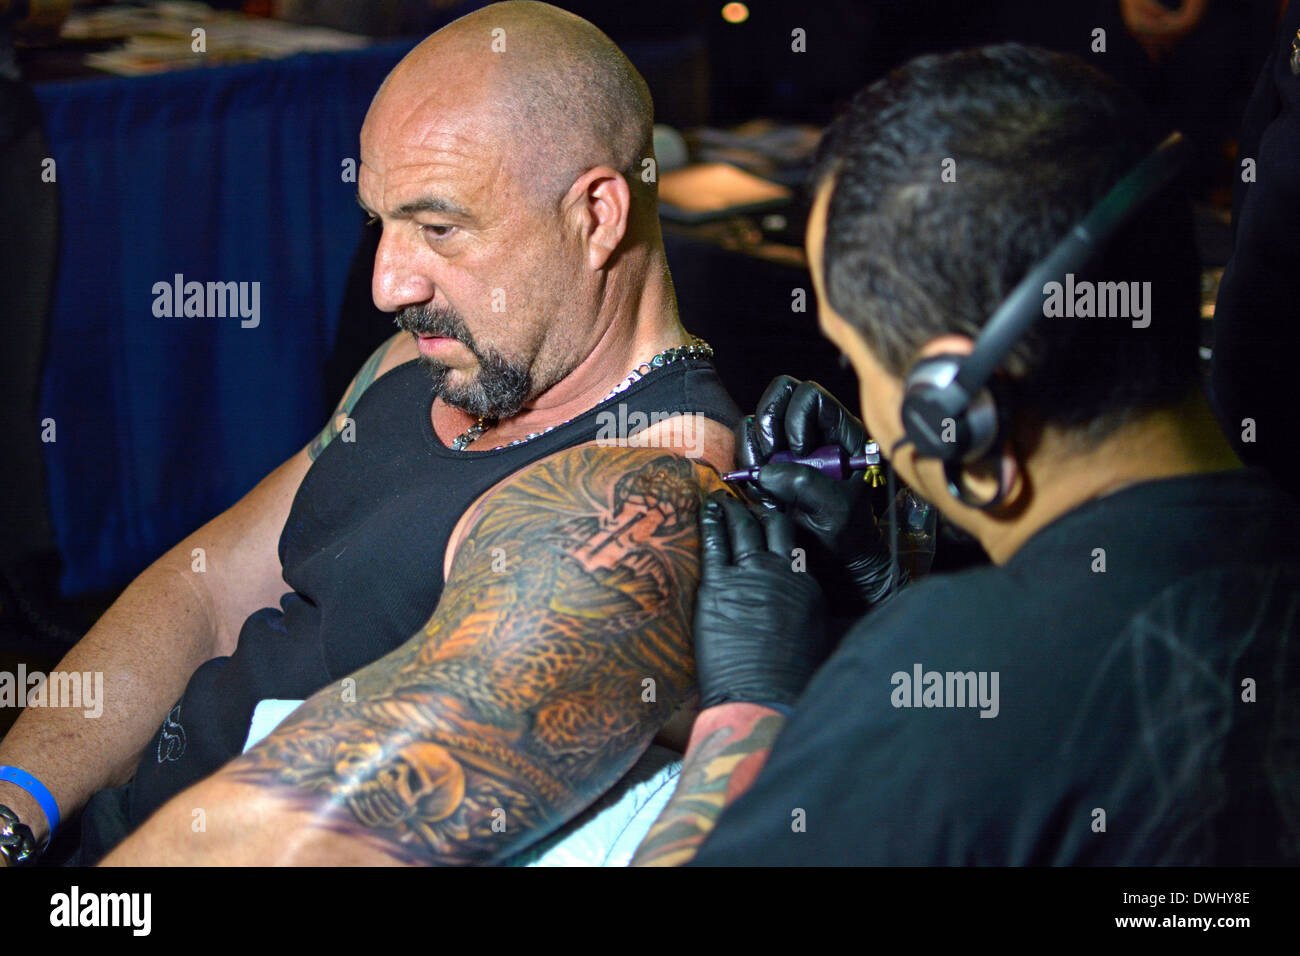 Man getting a large arm tattoo at the New York Tattoo